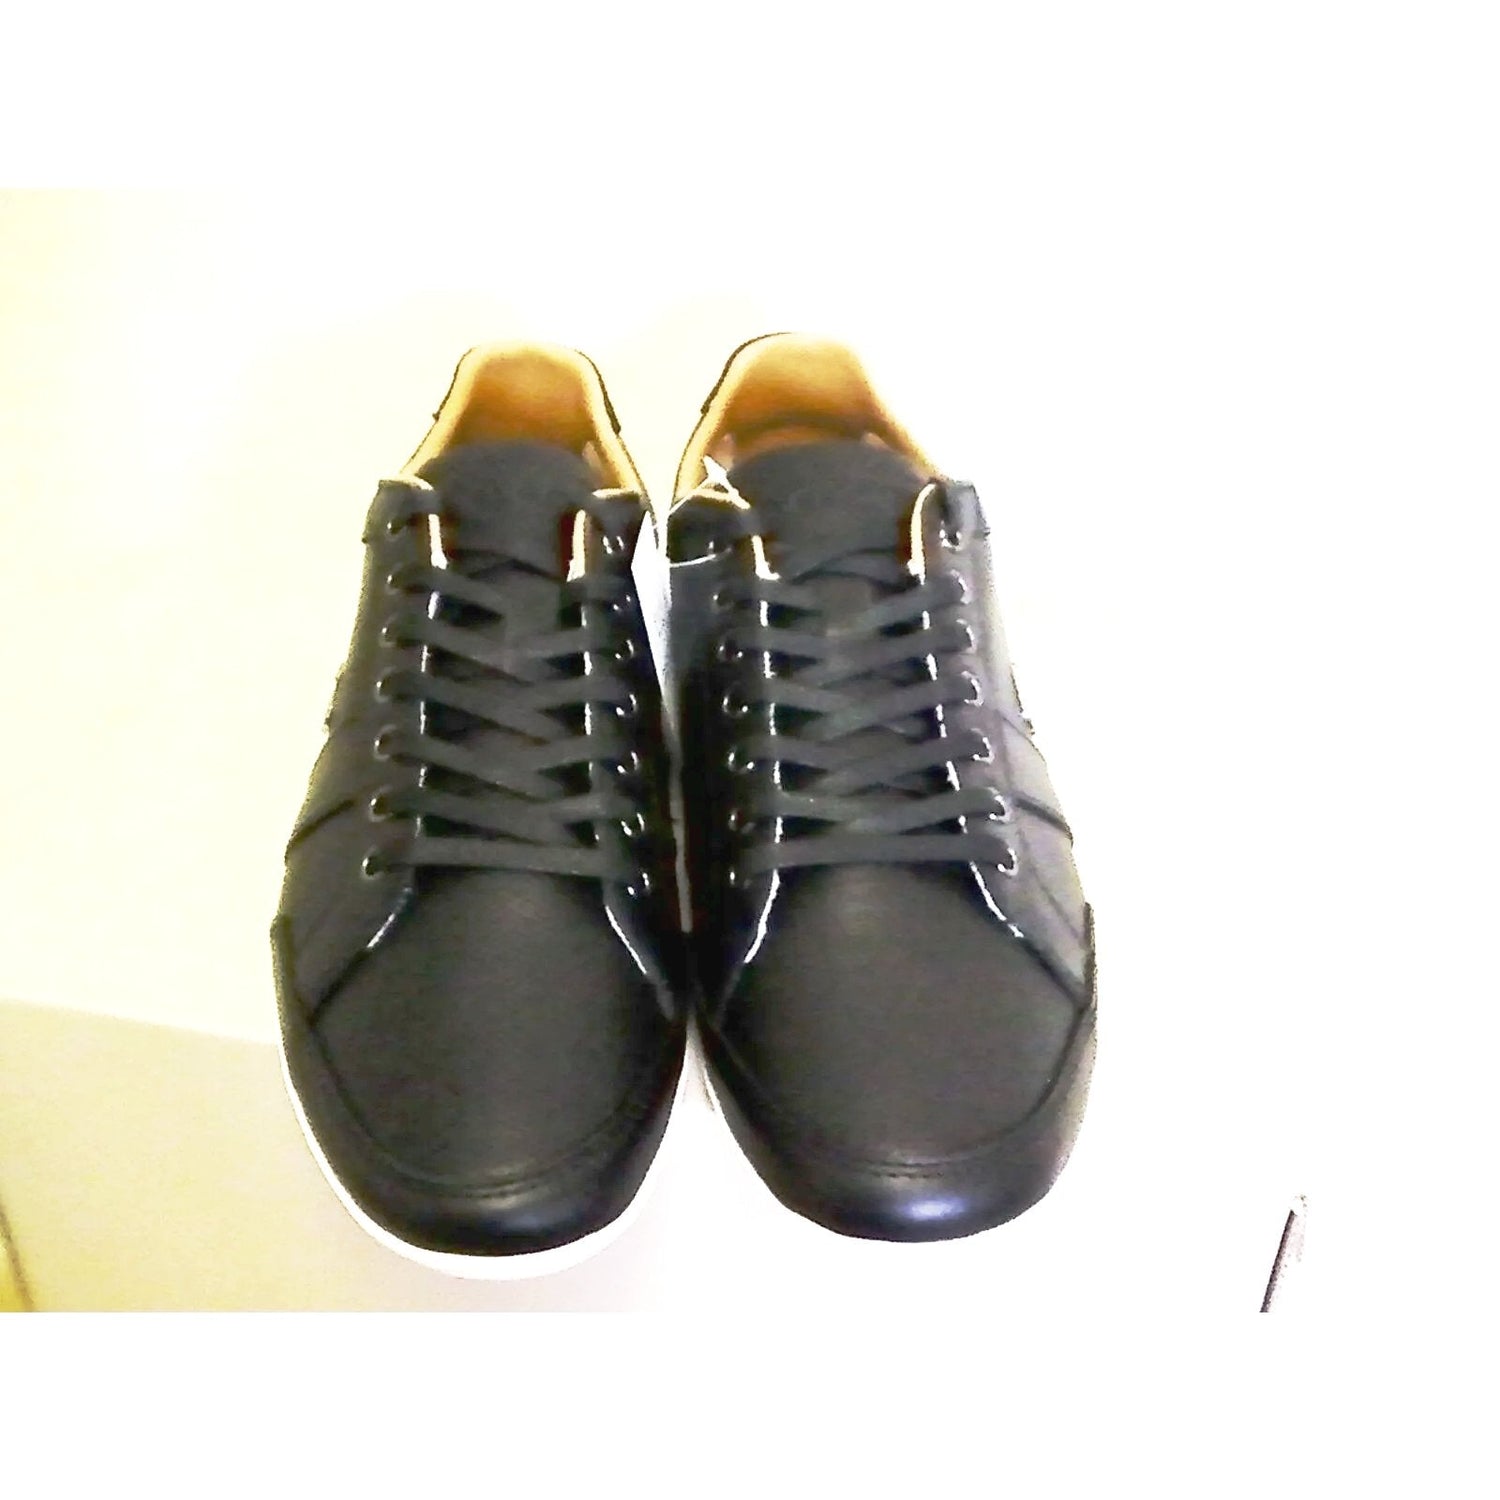 Lacoste men shoes alisos 16 spm casual black leather size 10 us new with box - Classic Fashion DealsLacoste men shoes alisos 16 spm casual black leather size 10 us new with boxCasual ShoesLacosteClassic Fashion Deals